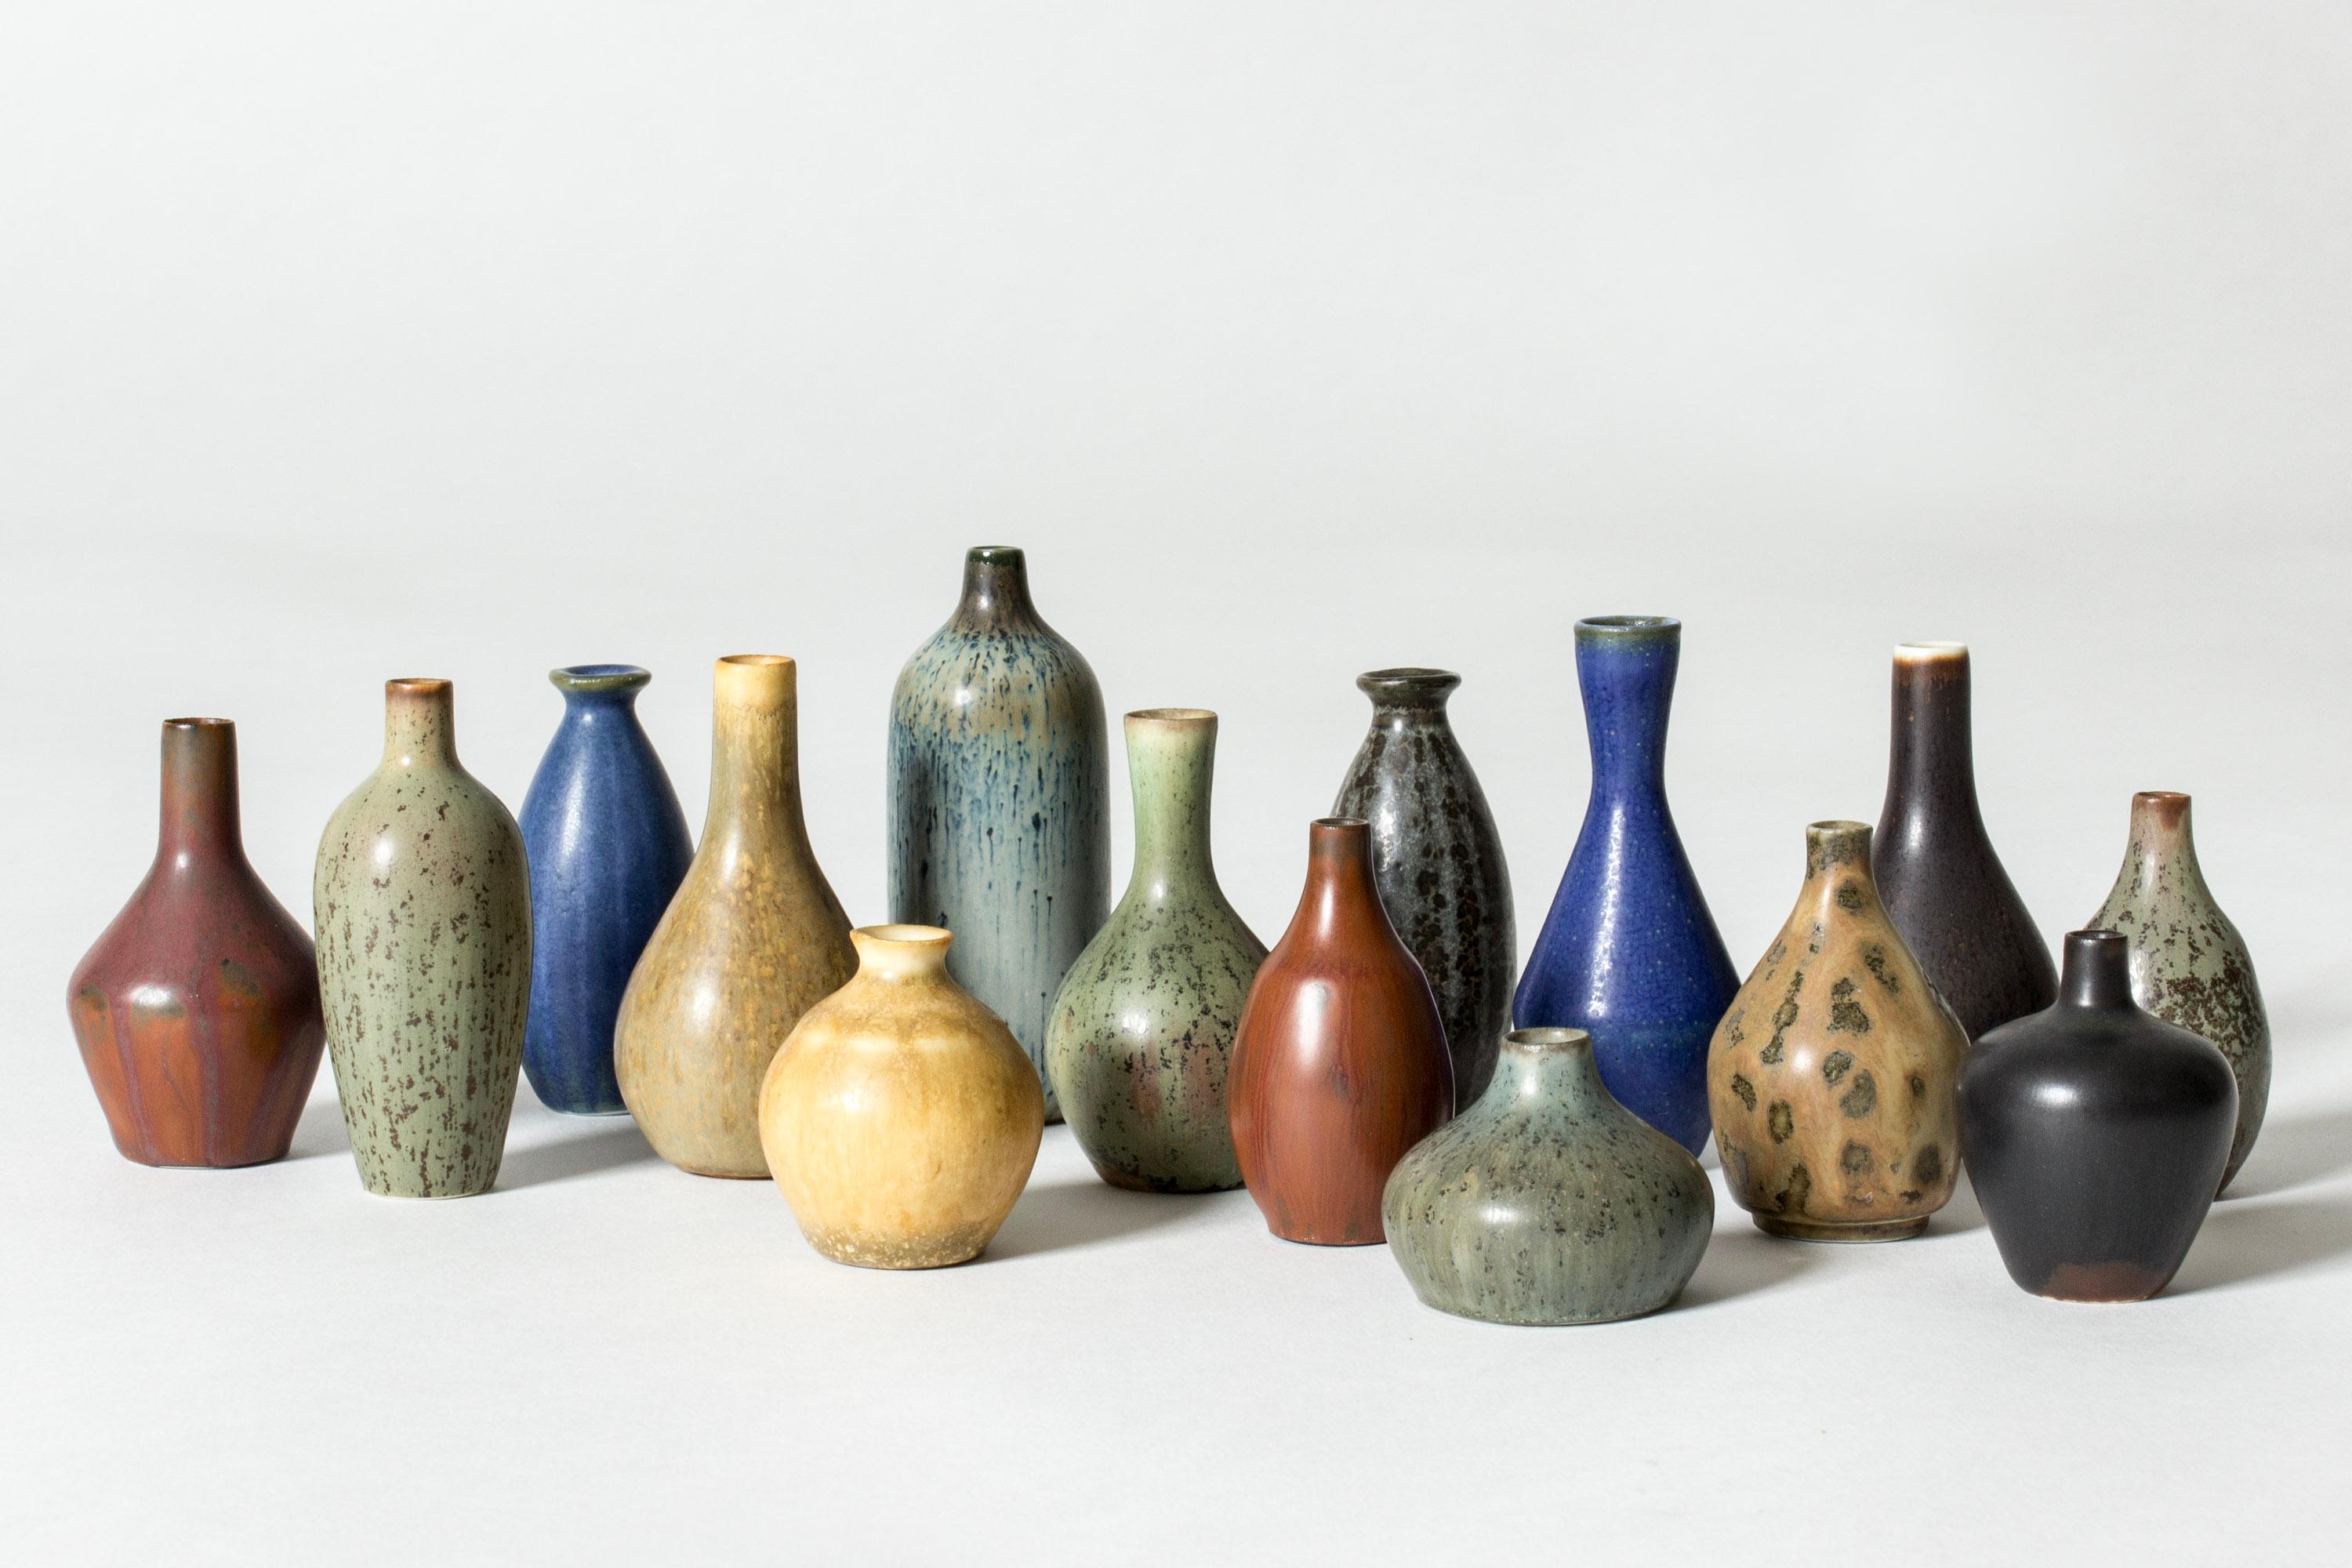 Collection of 15 miniature stoneware vases by Carl-Harry Stålhane, in delightful plump and streamlined forms. Glazed in earthy tones in blue, green, yellow, rust and brown, organic patterns.

Heights 3.3-8.1 cm
Diameter 2.8-3.9 cm

Carl-Harry